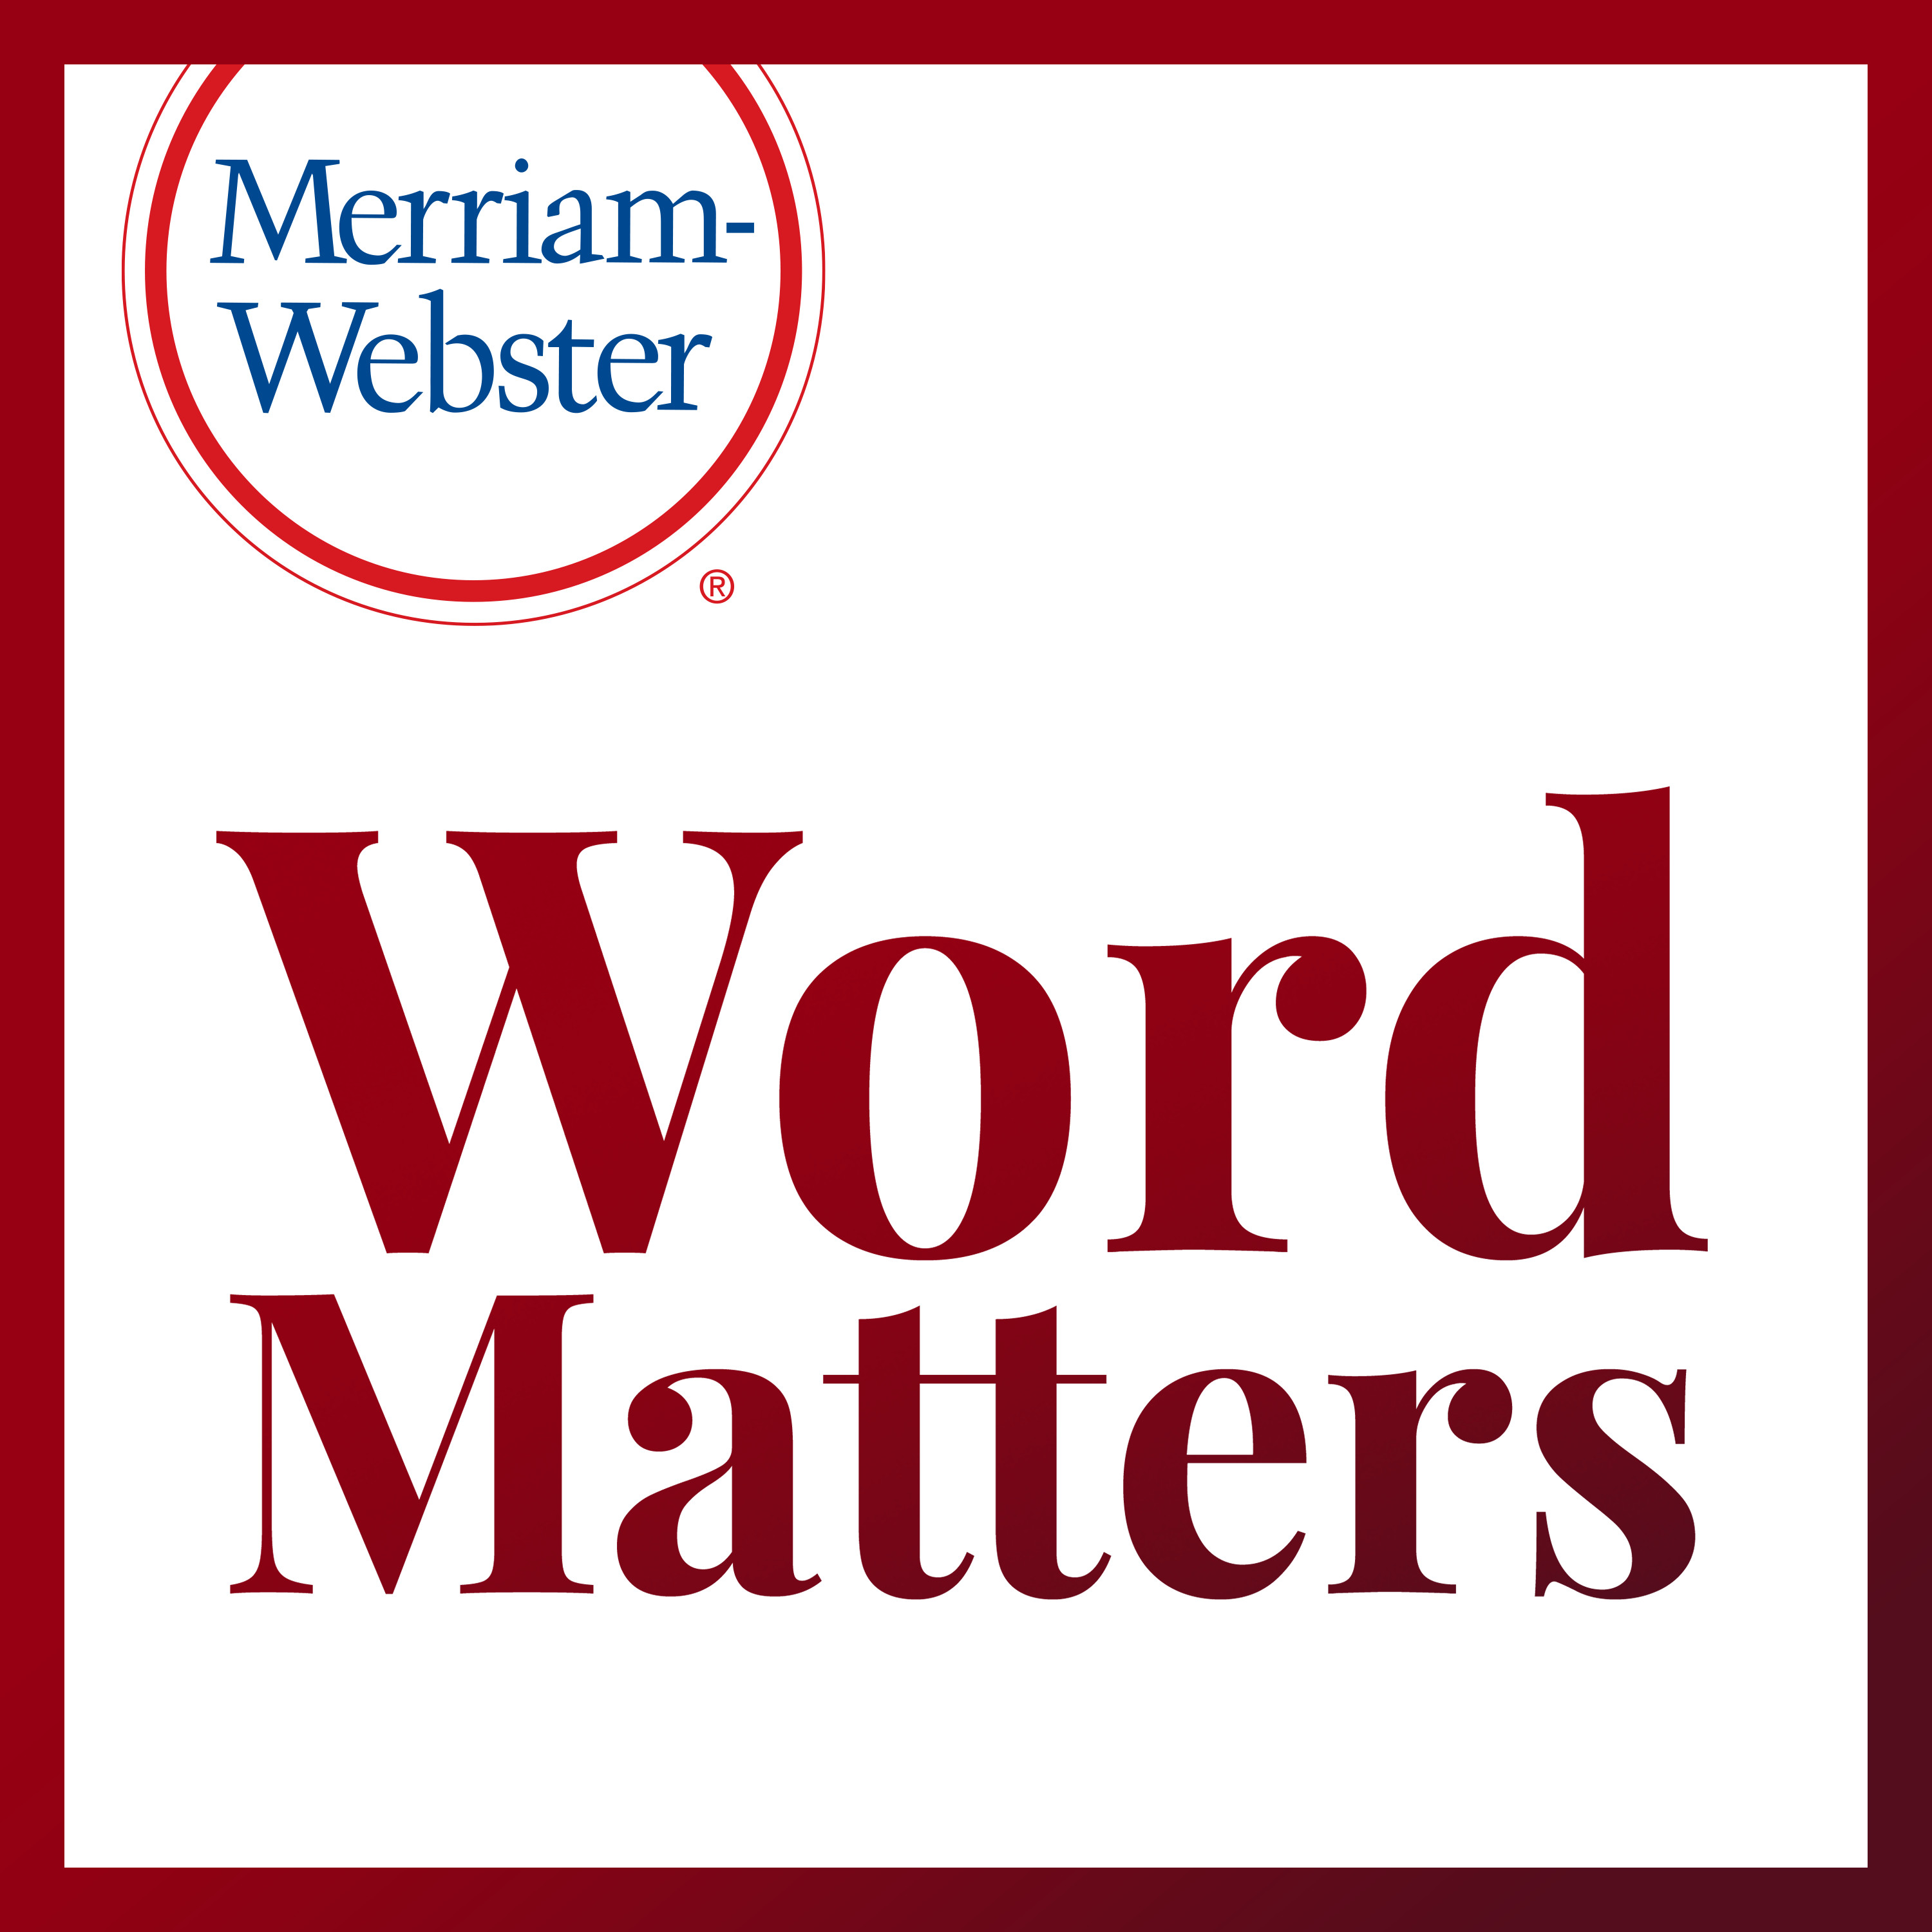 Word Matters